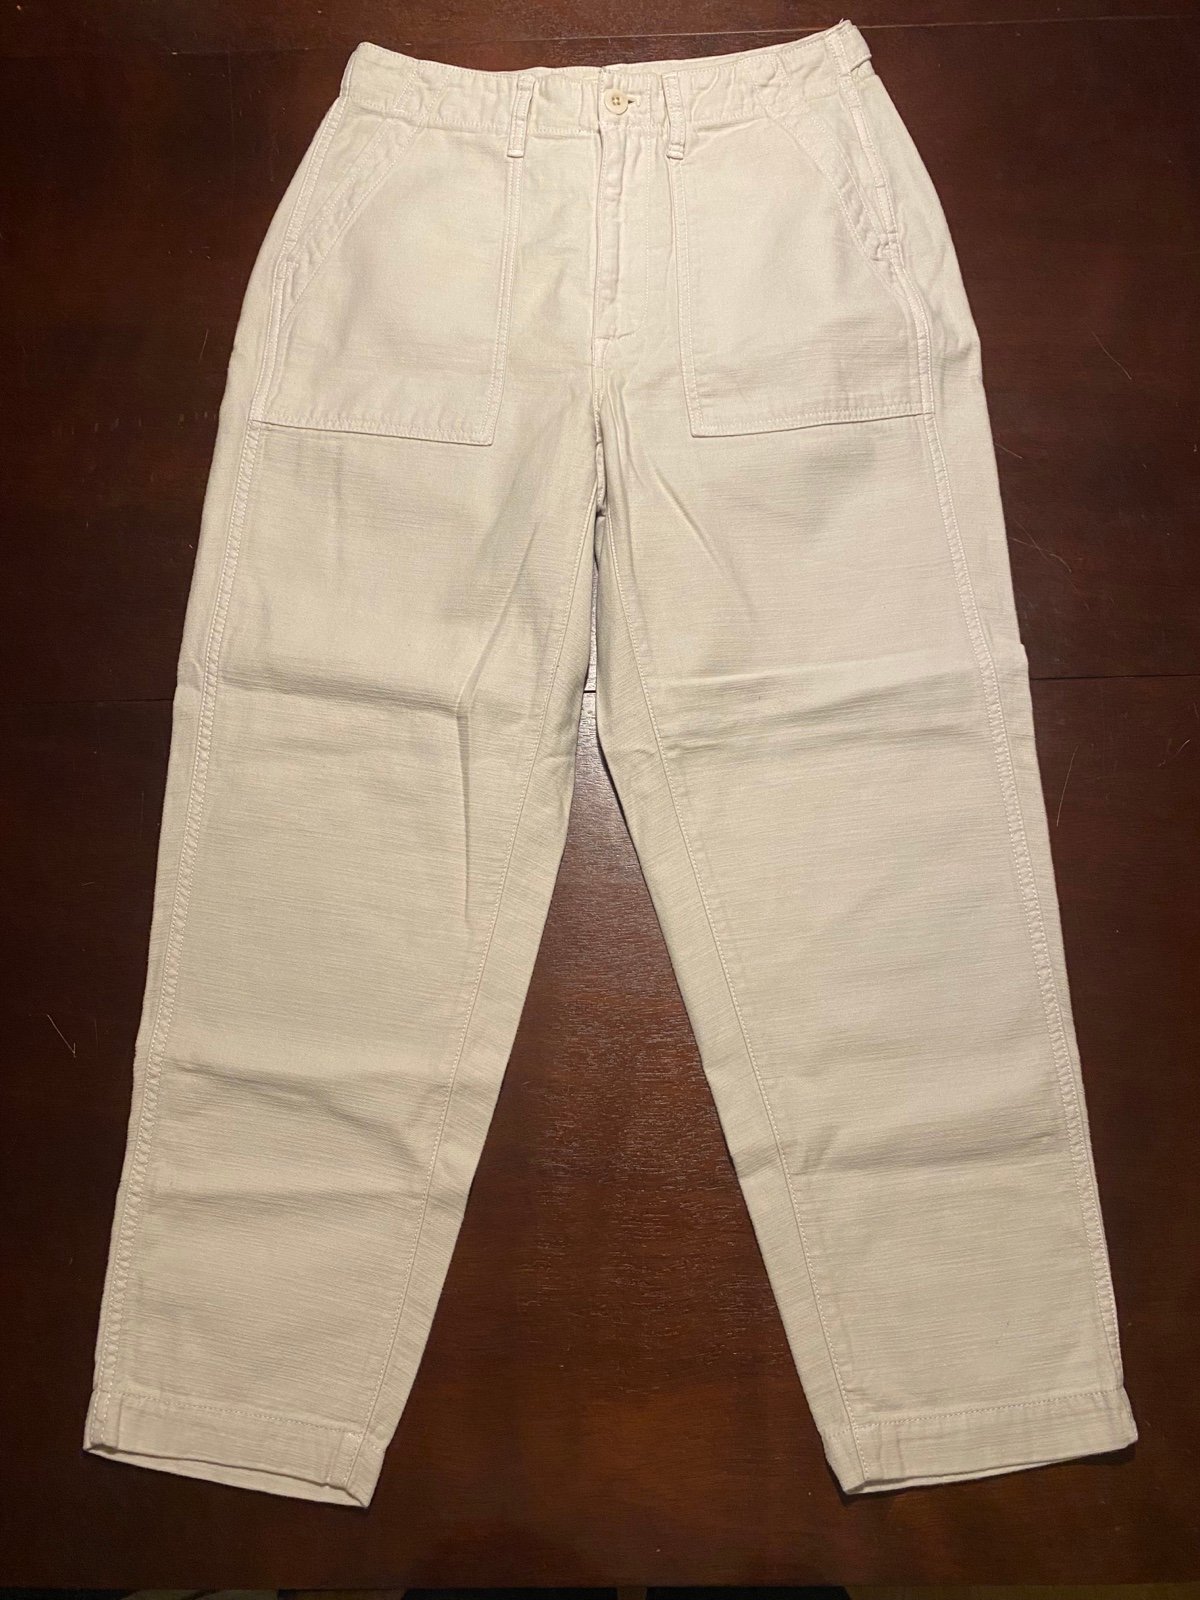 Discounted Womens Madewell Tan Beige Pants Size 27 100%